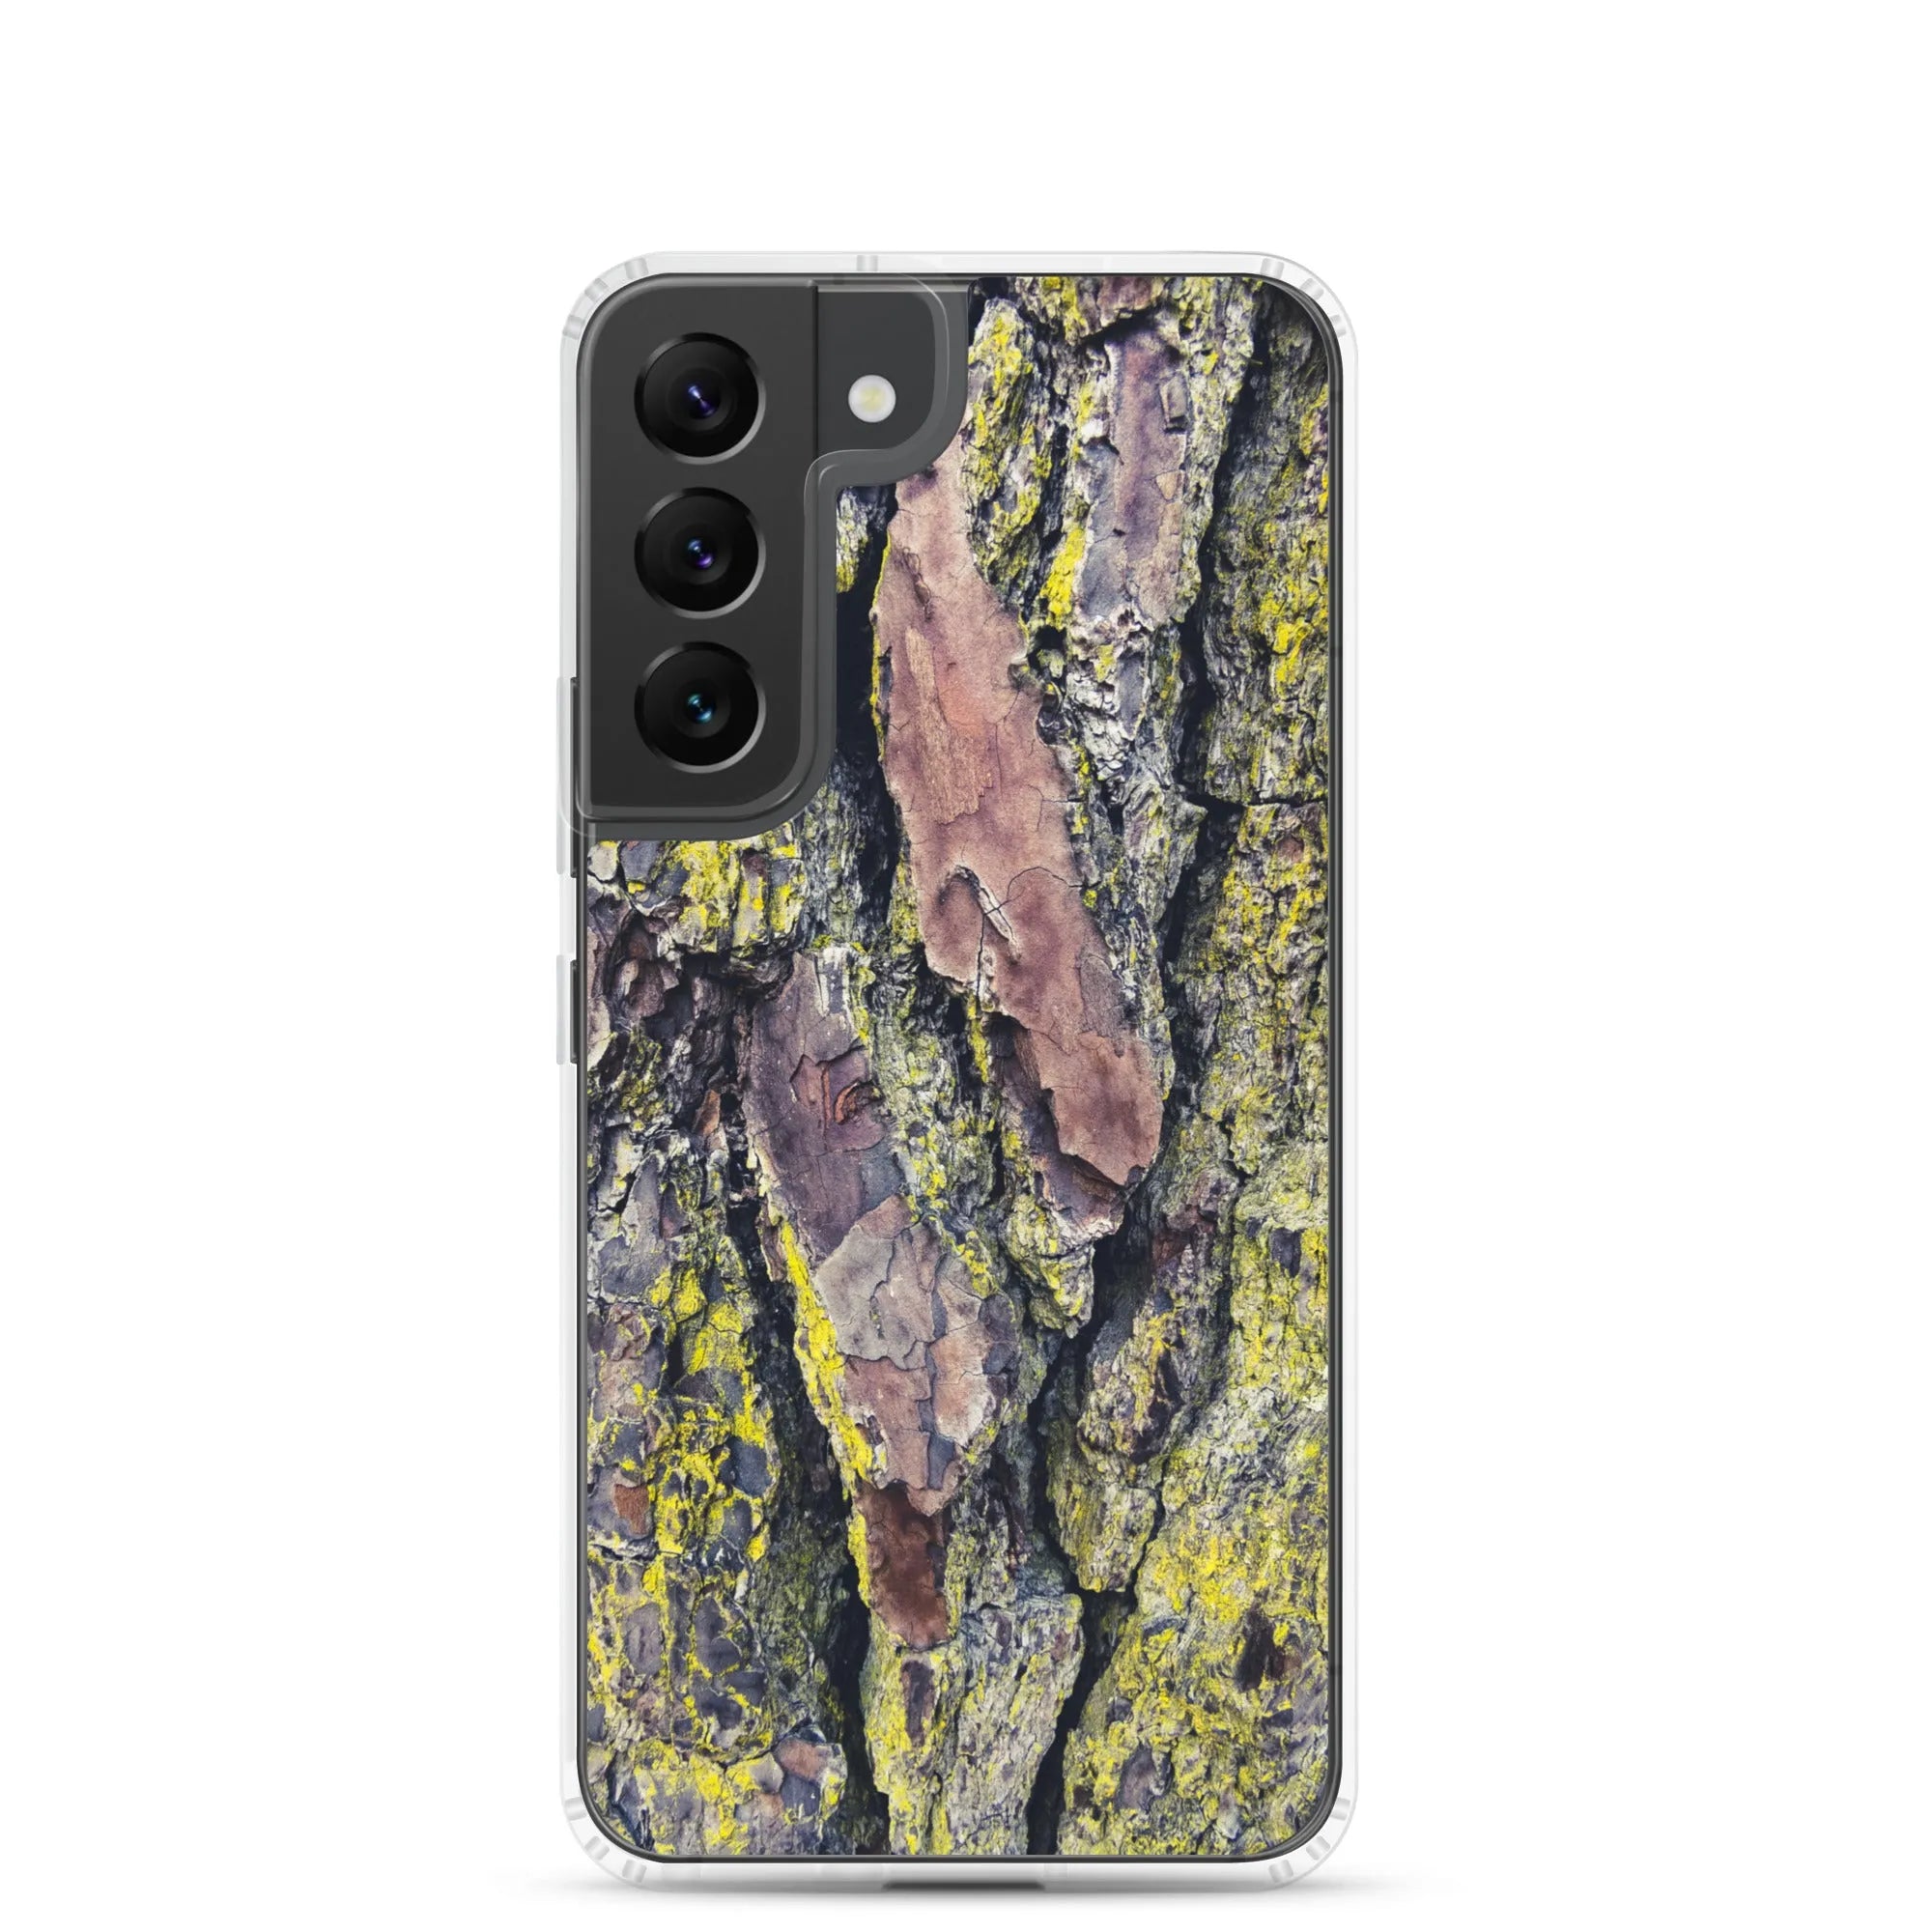 Barking Mad 2 + Too Samsung Galaxy Case - Samsung Galaxy S22 - Mobile Phone Cases - Aesthetic Art